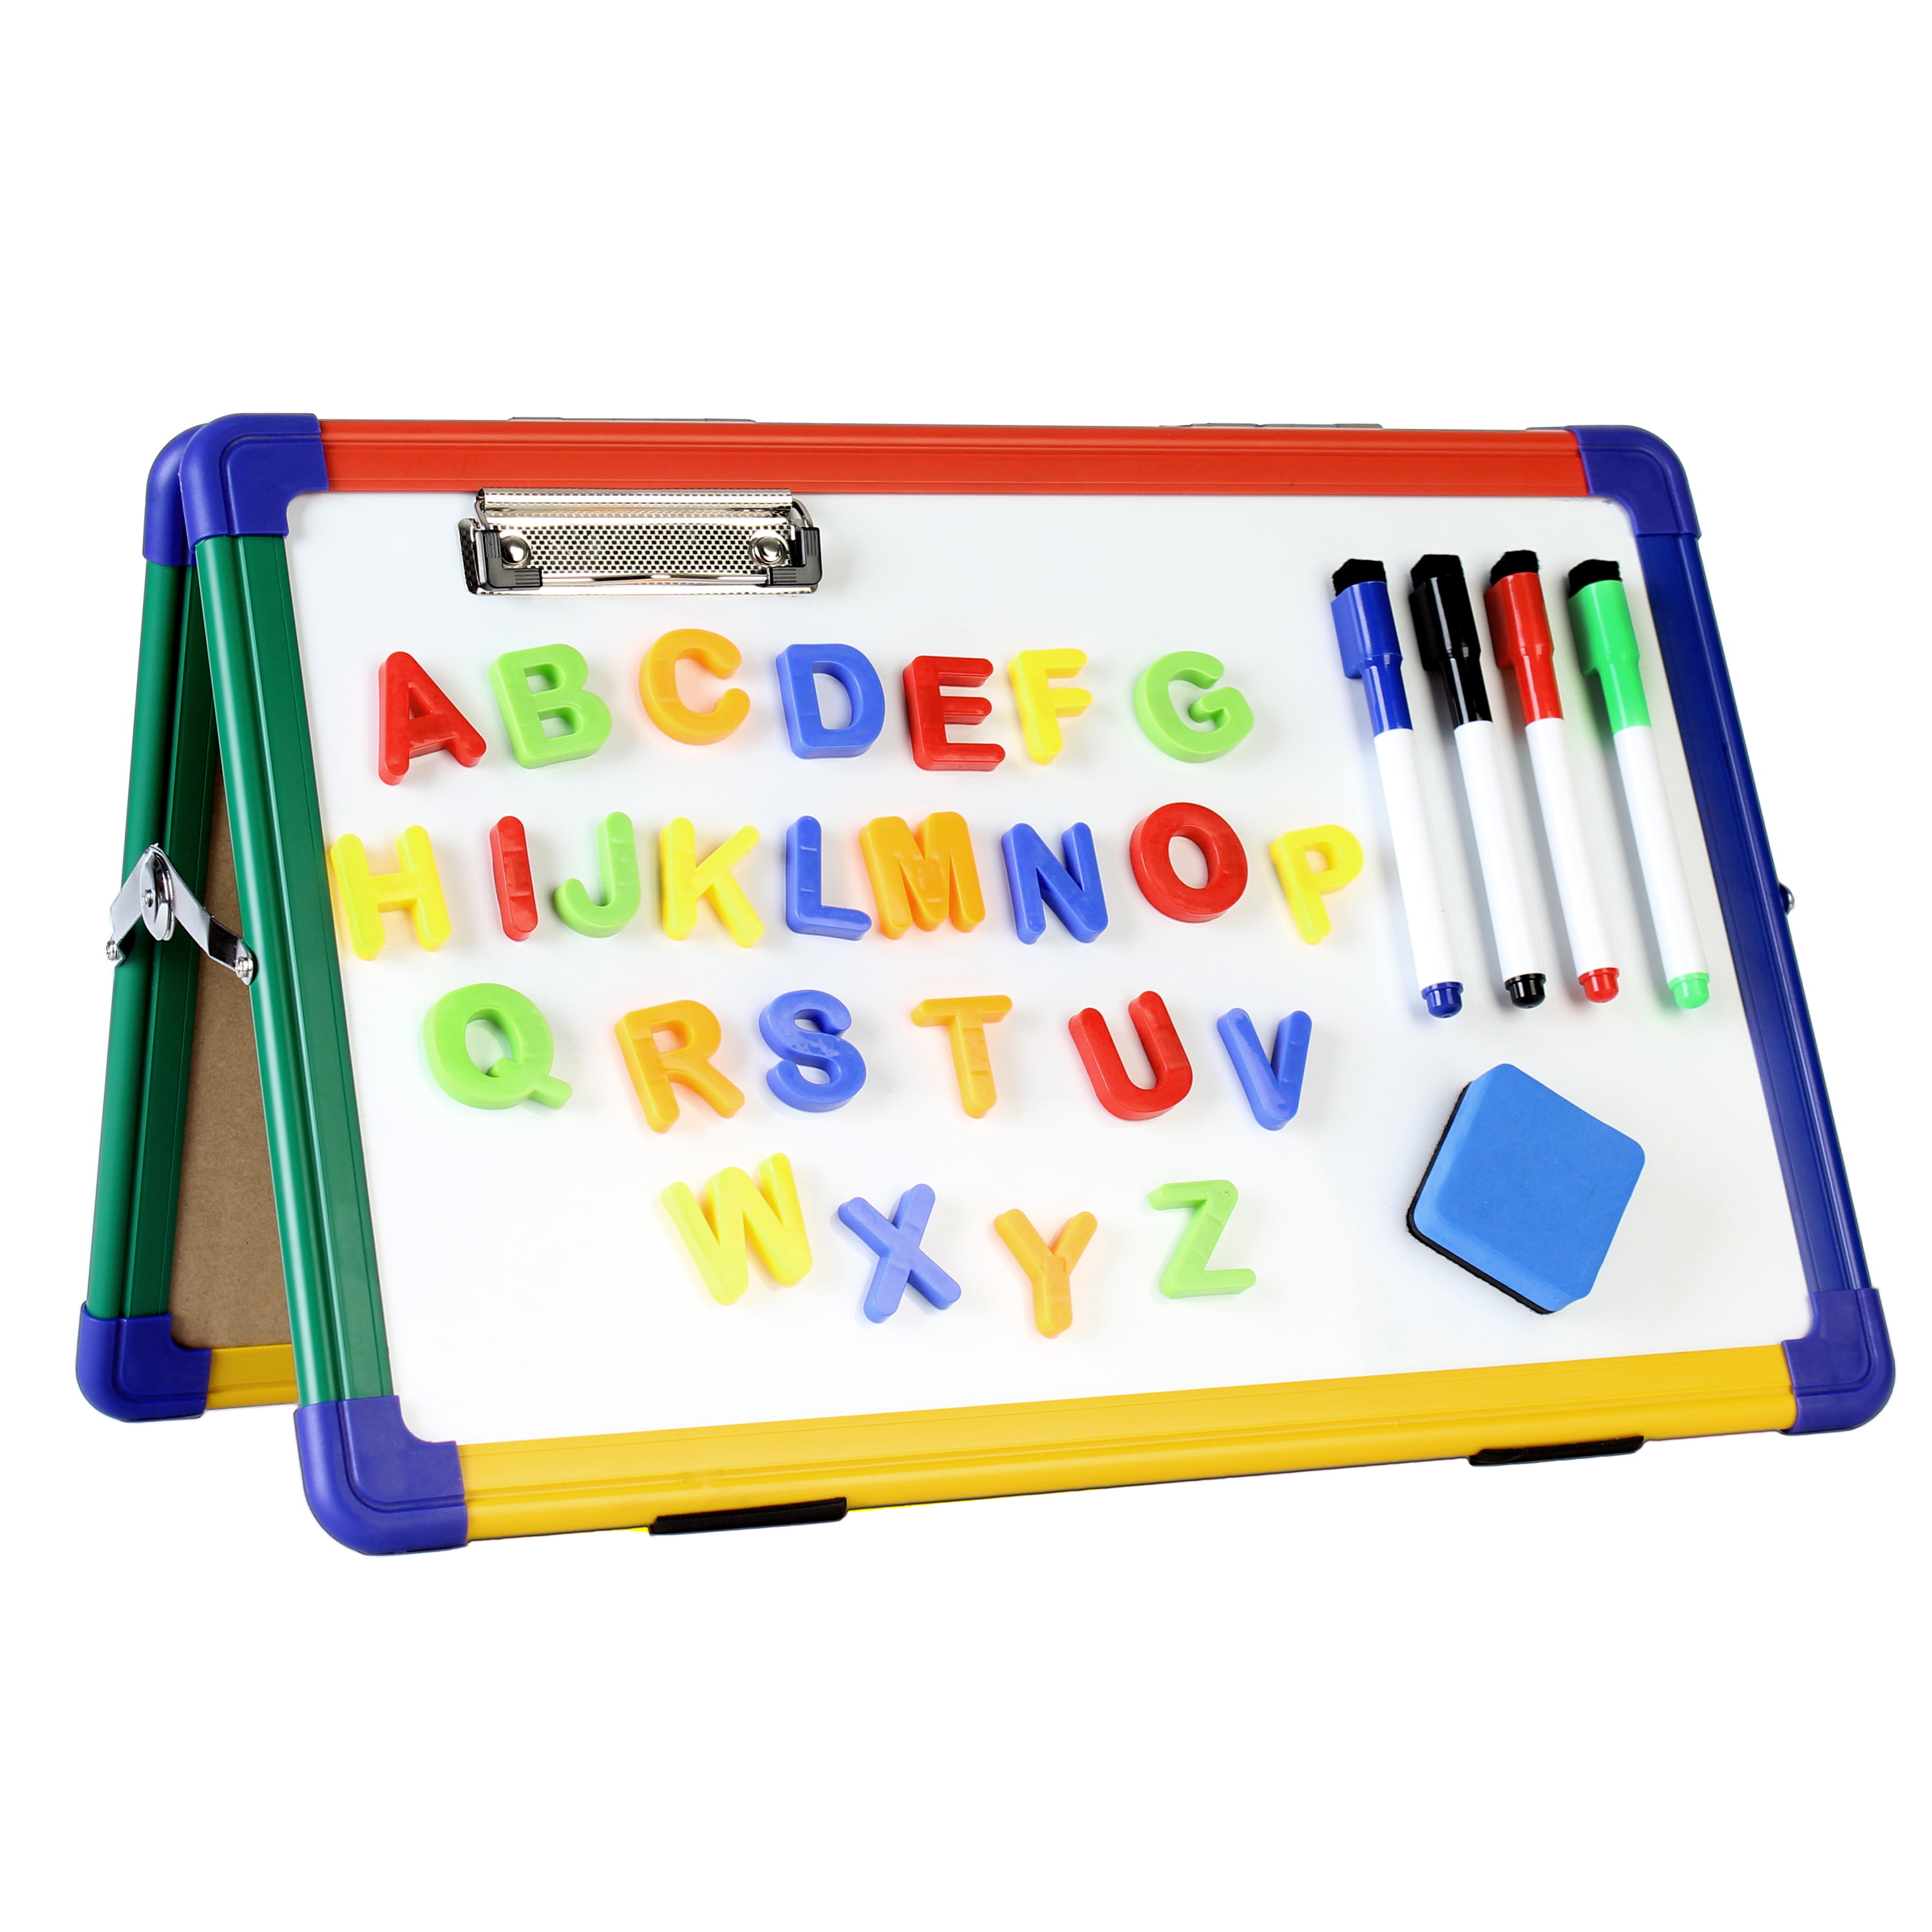 Double Sided Magnetic White Board with Two Magnets Two Color Markers and Paper Clip 12x16 IbexStationers Small Dry Erase Board for Home Learning Tabletop Easel Whiteboard 